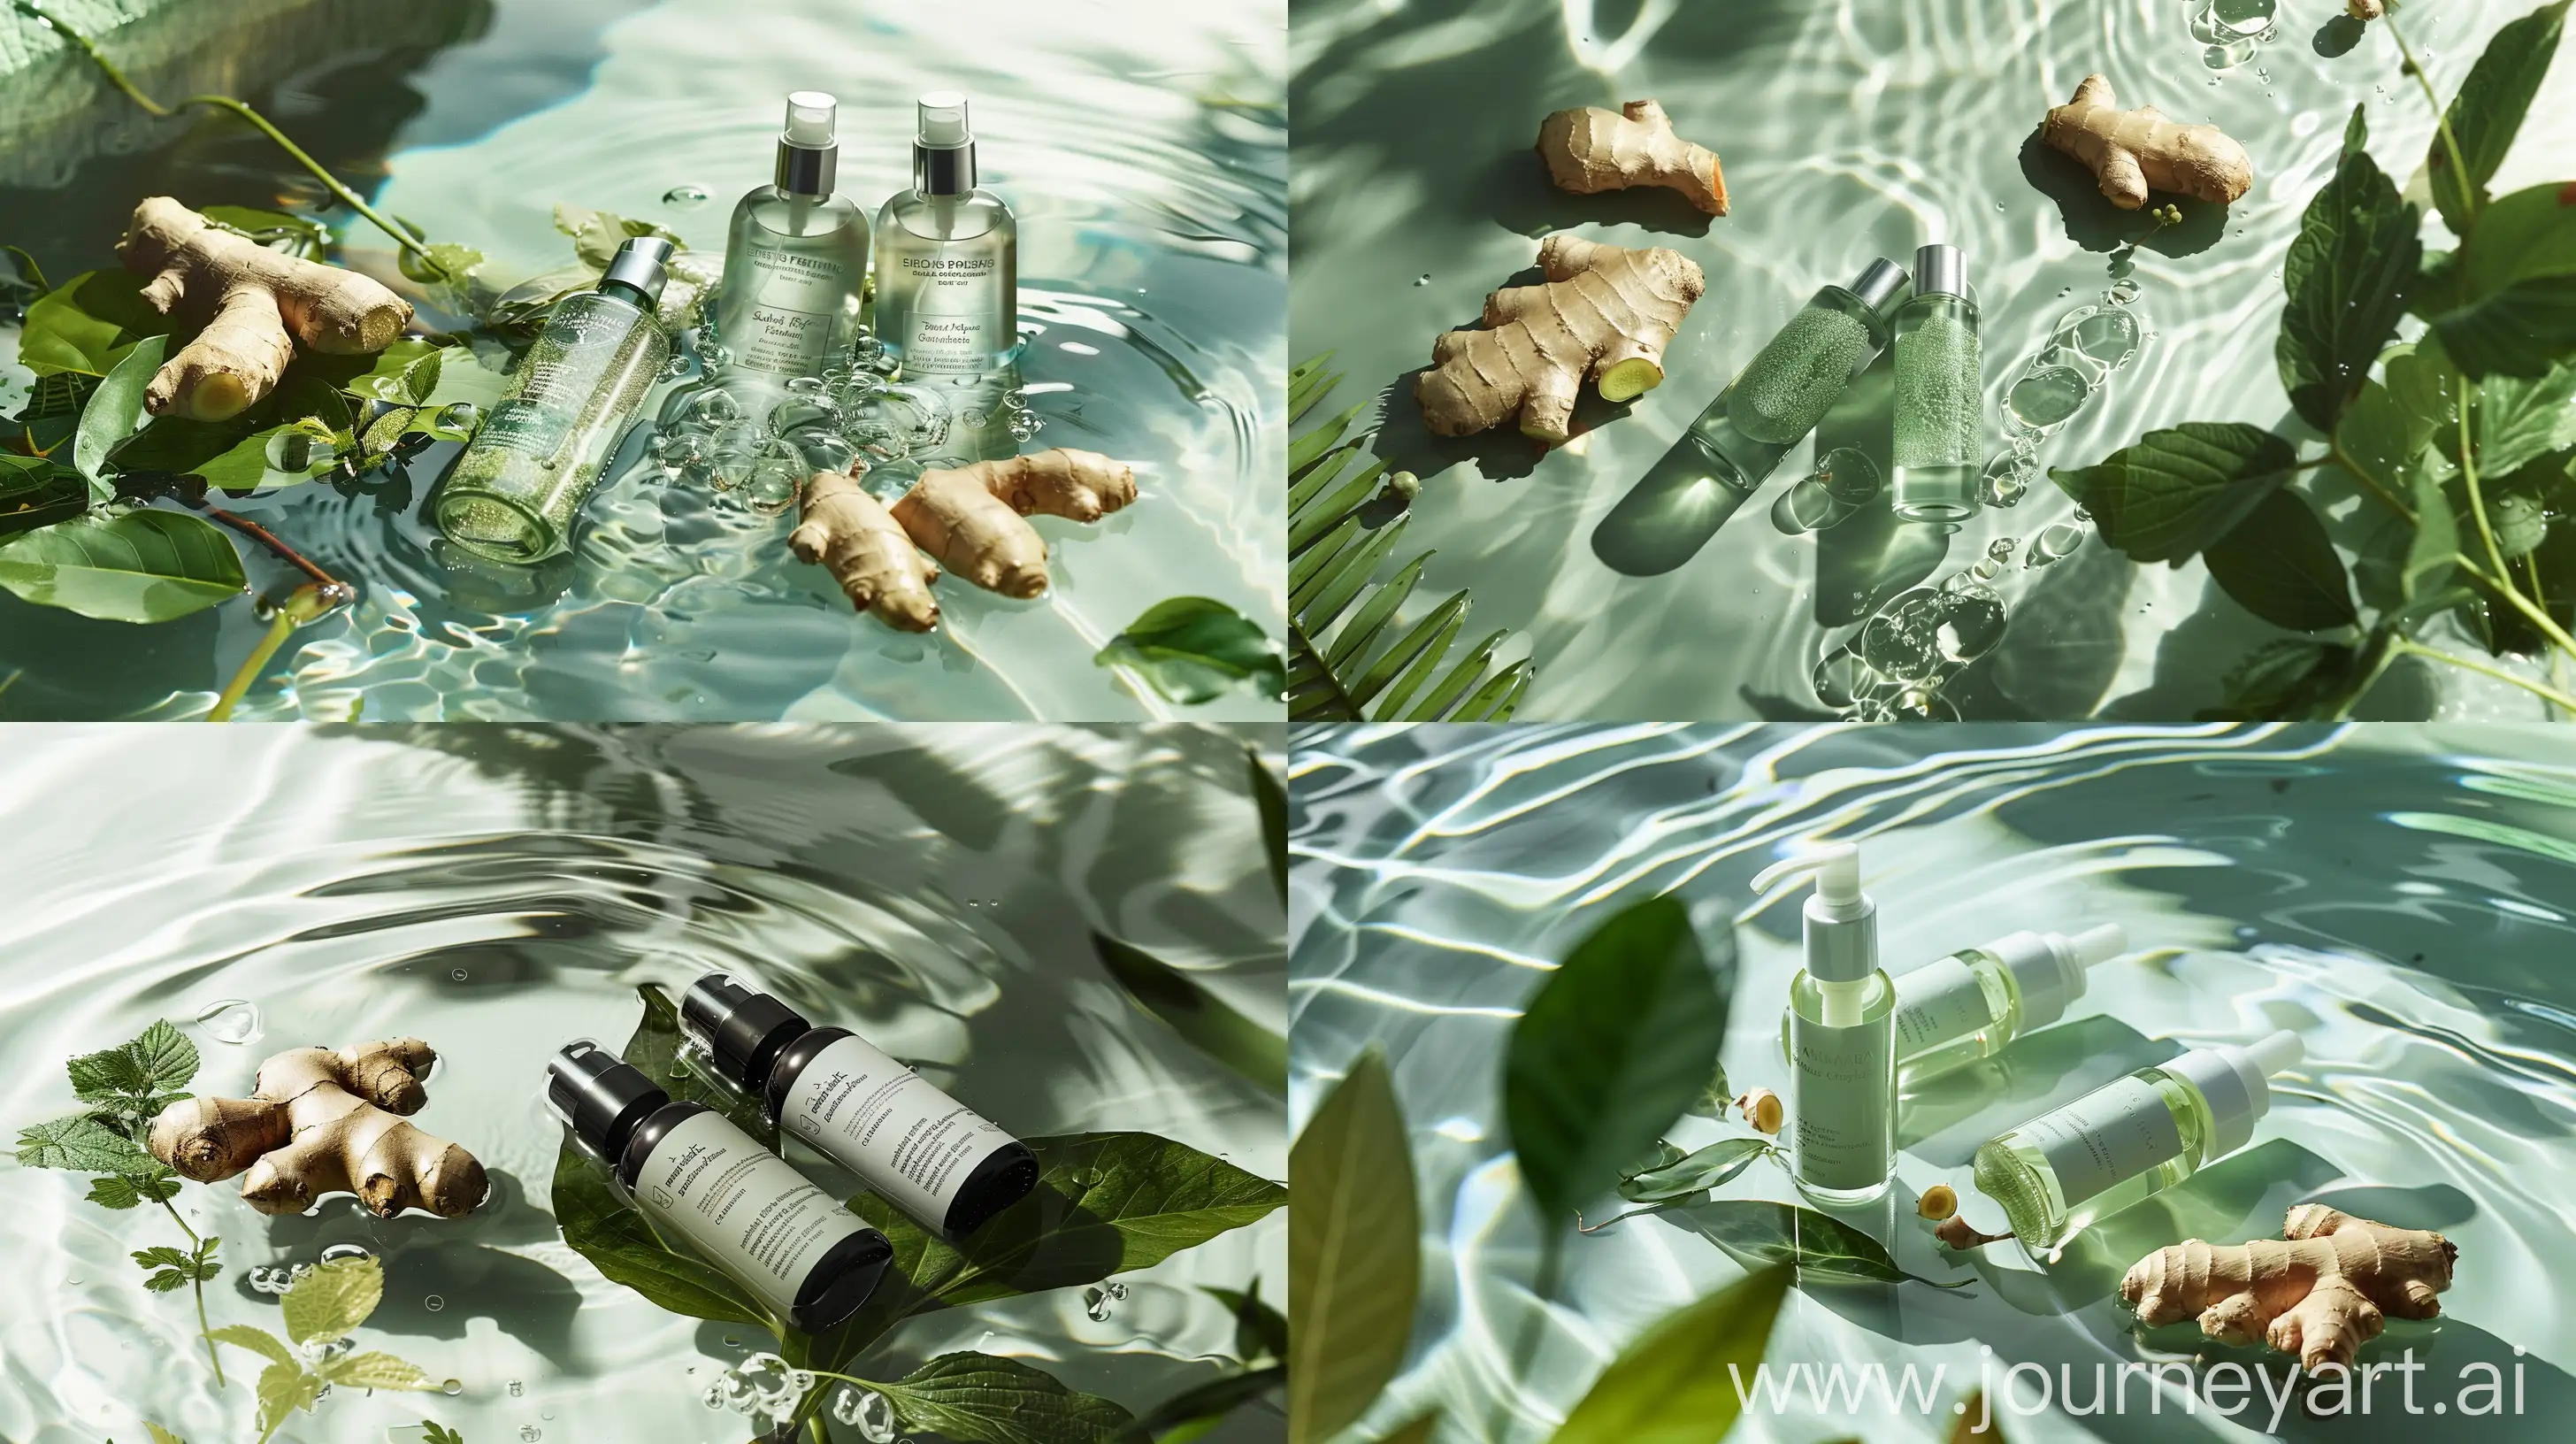 Cosmetic-Bottles-Floating-on-Green-Water-with-Ginger-and-Perilla-Leaves